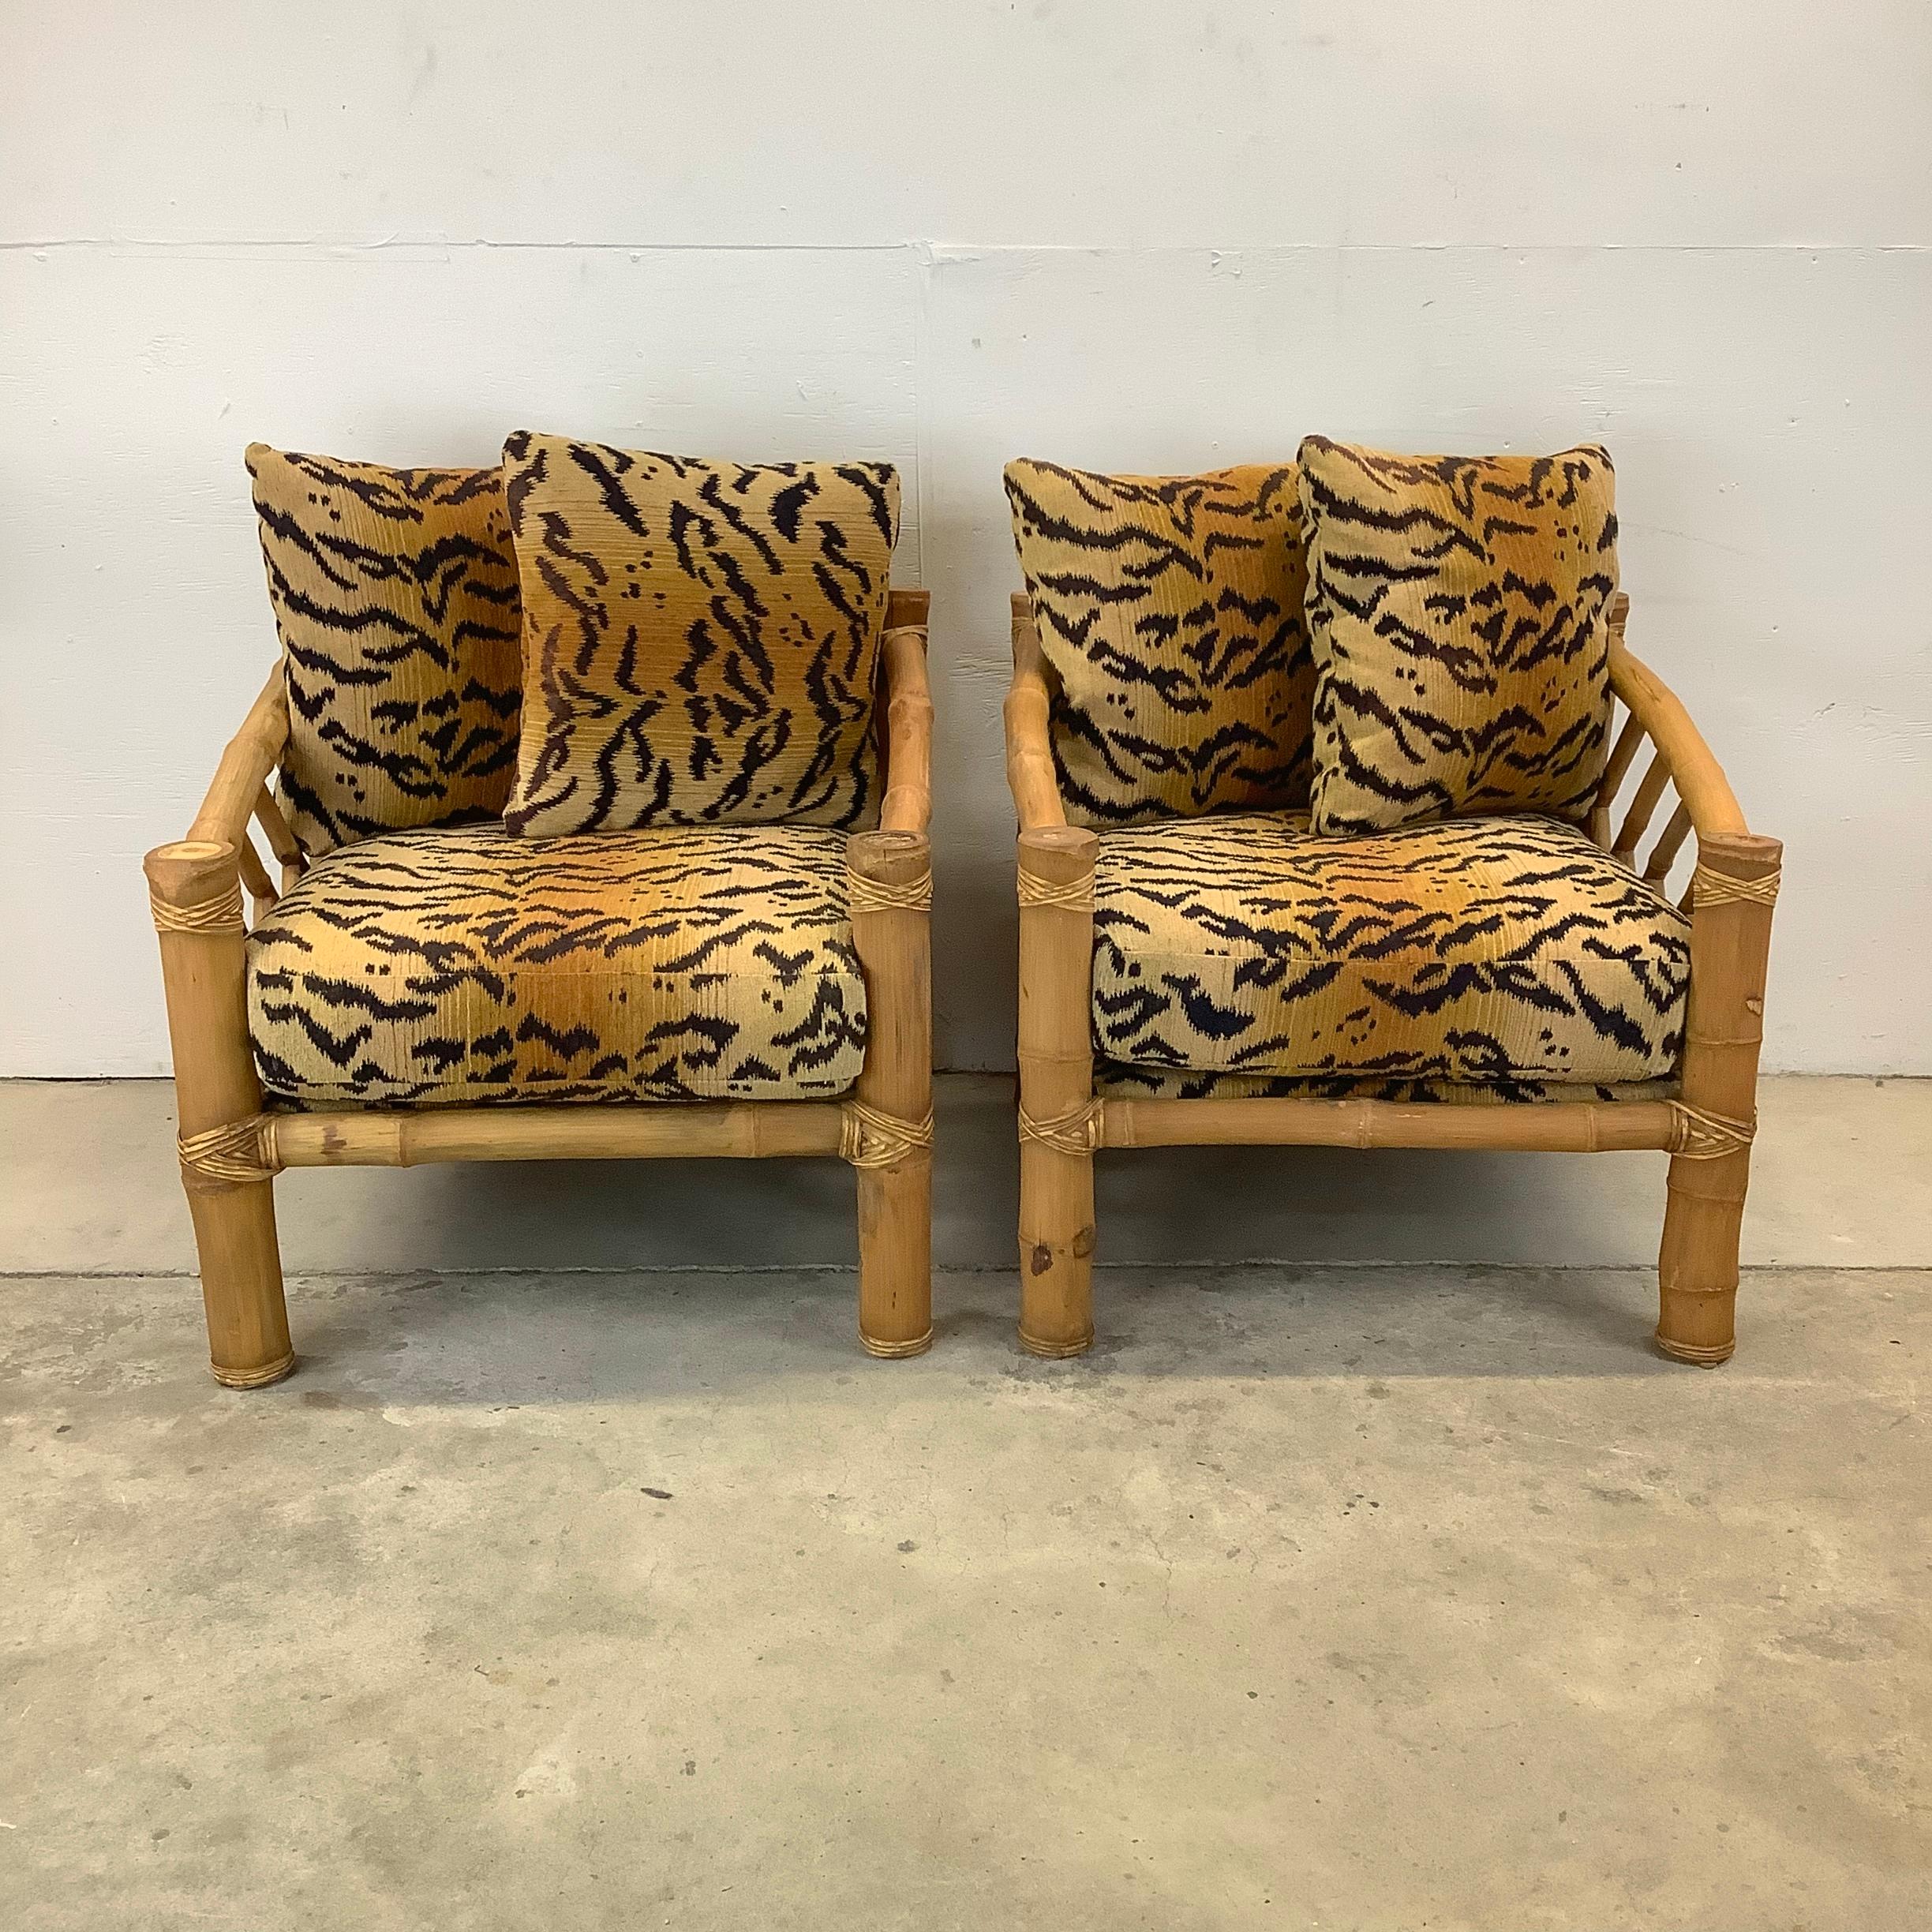 Pair Vintage Bamboo Armchairs & Ottoman in Tiger Print In Fair Condition For Sale In Trenton, NJ